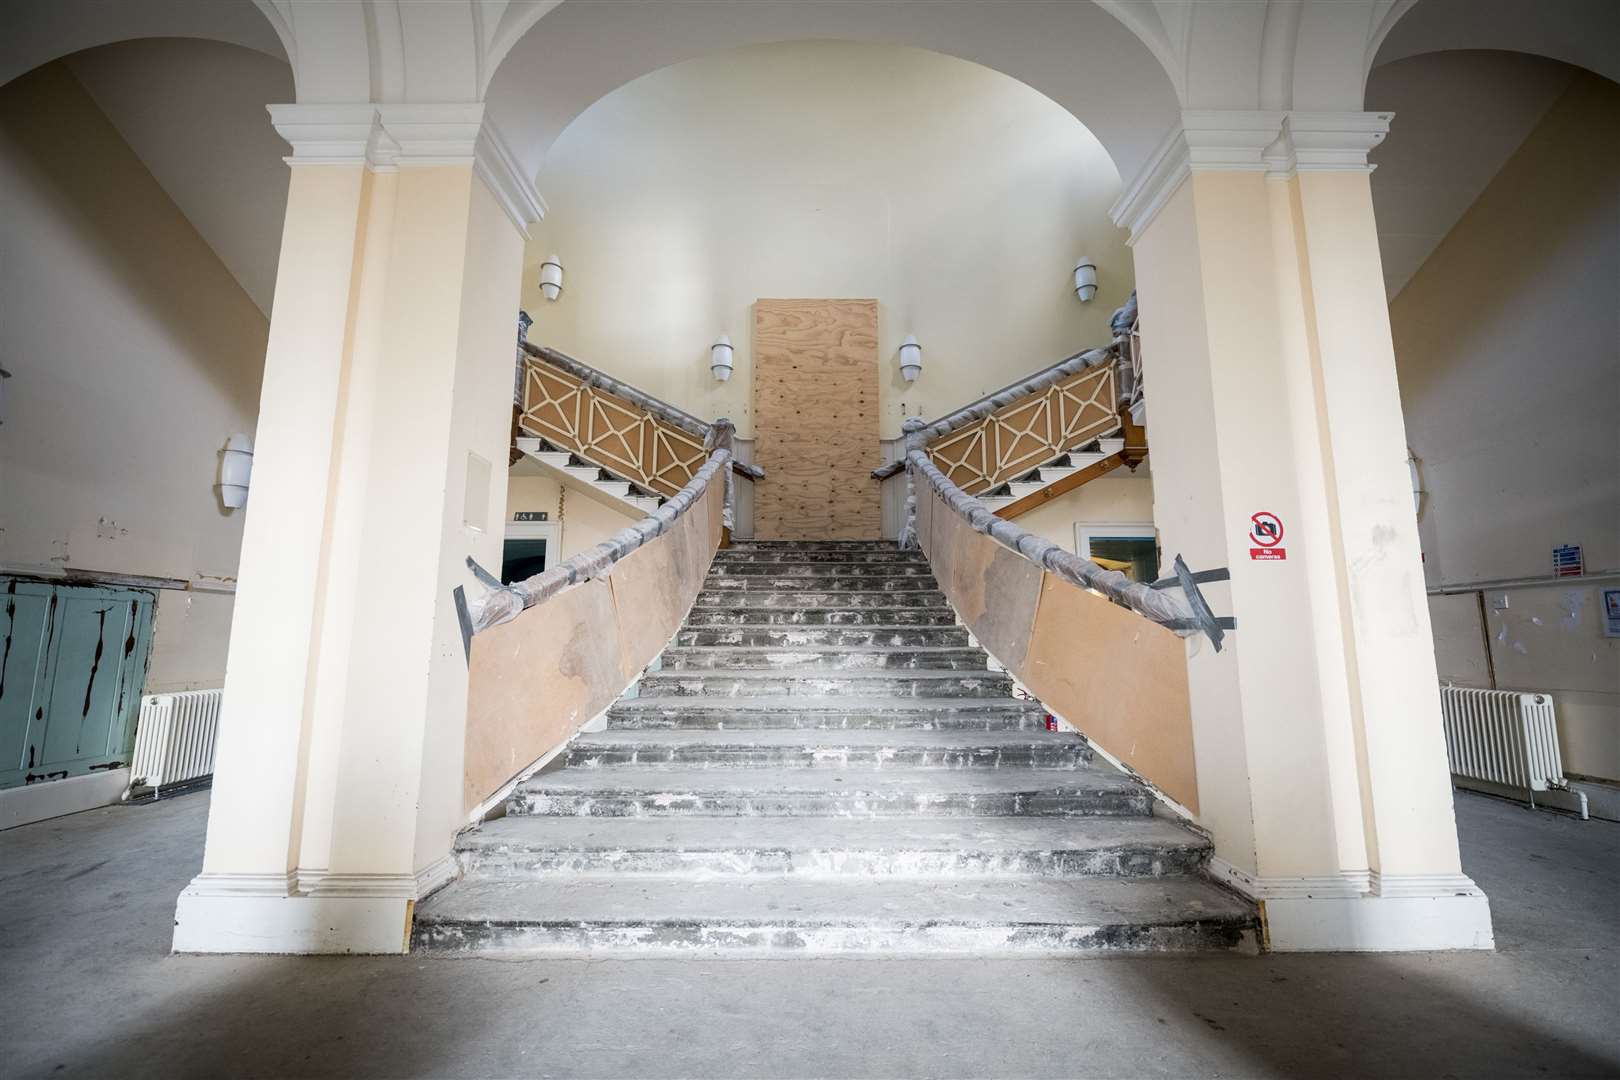 The main entrance to Inverness Castle leads to the Grand Staircase.